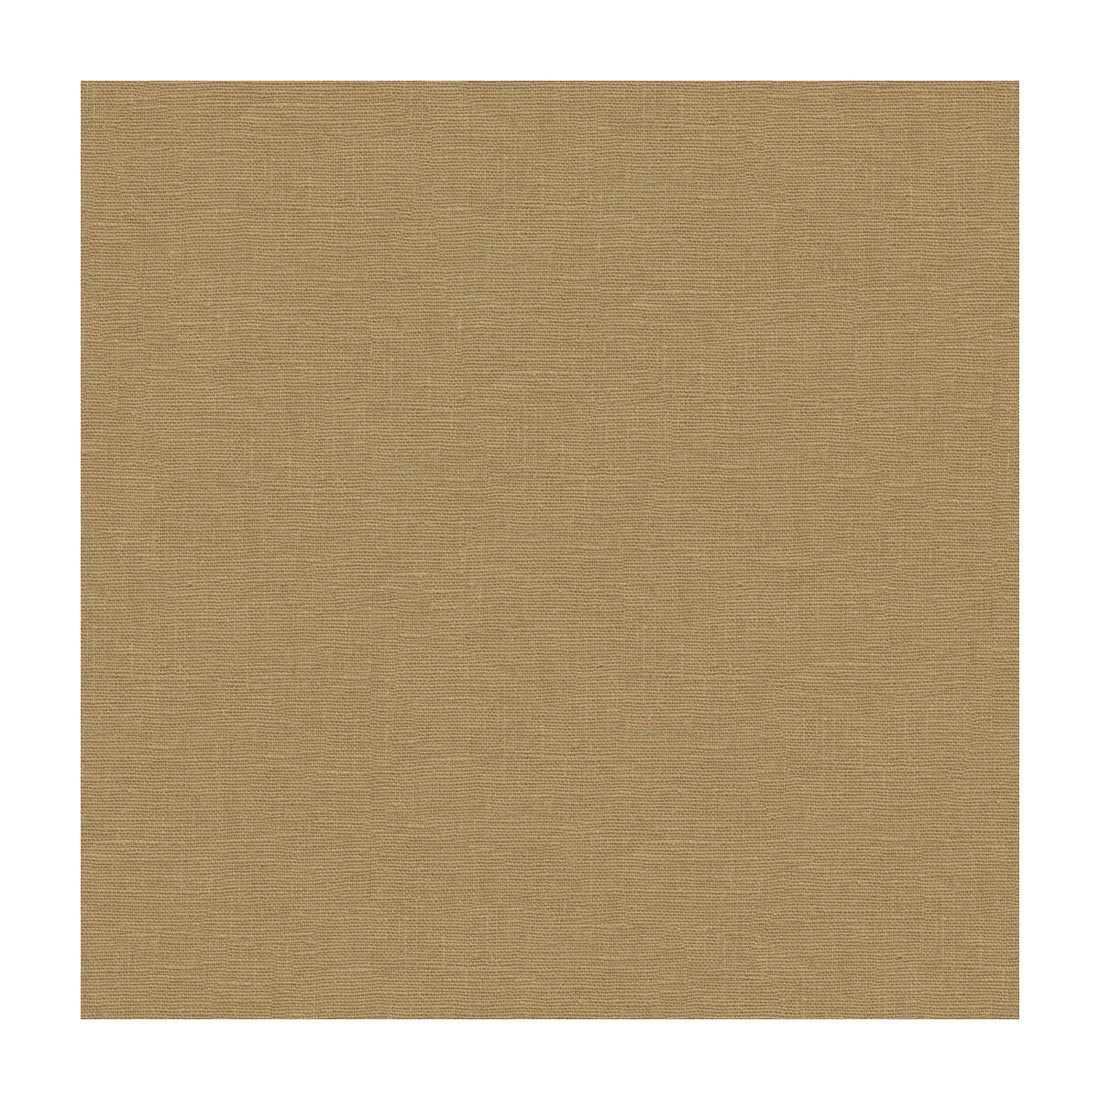 Dublin fabric in peanut color - pattern 32344.106.0 - by Kravet Basics in the Perfect Plains collection